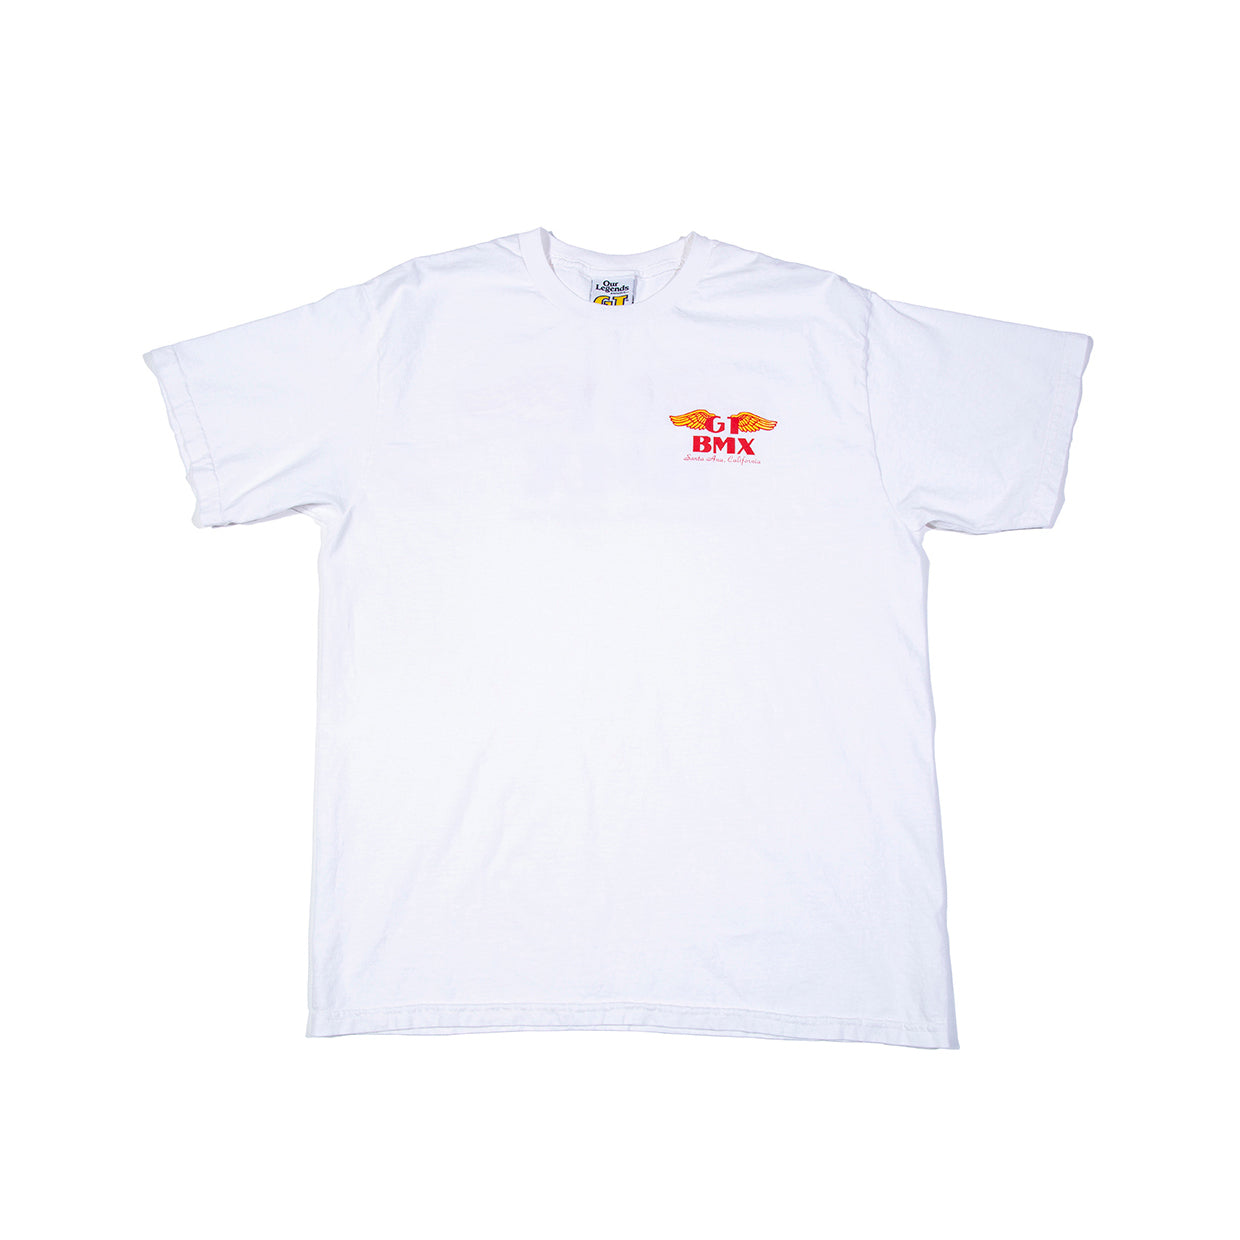 GT Wings T-Shirt - White w/ Red & Yellow